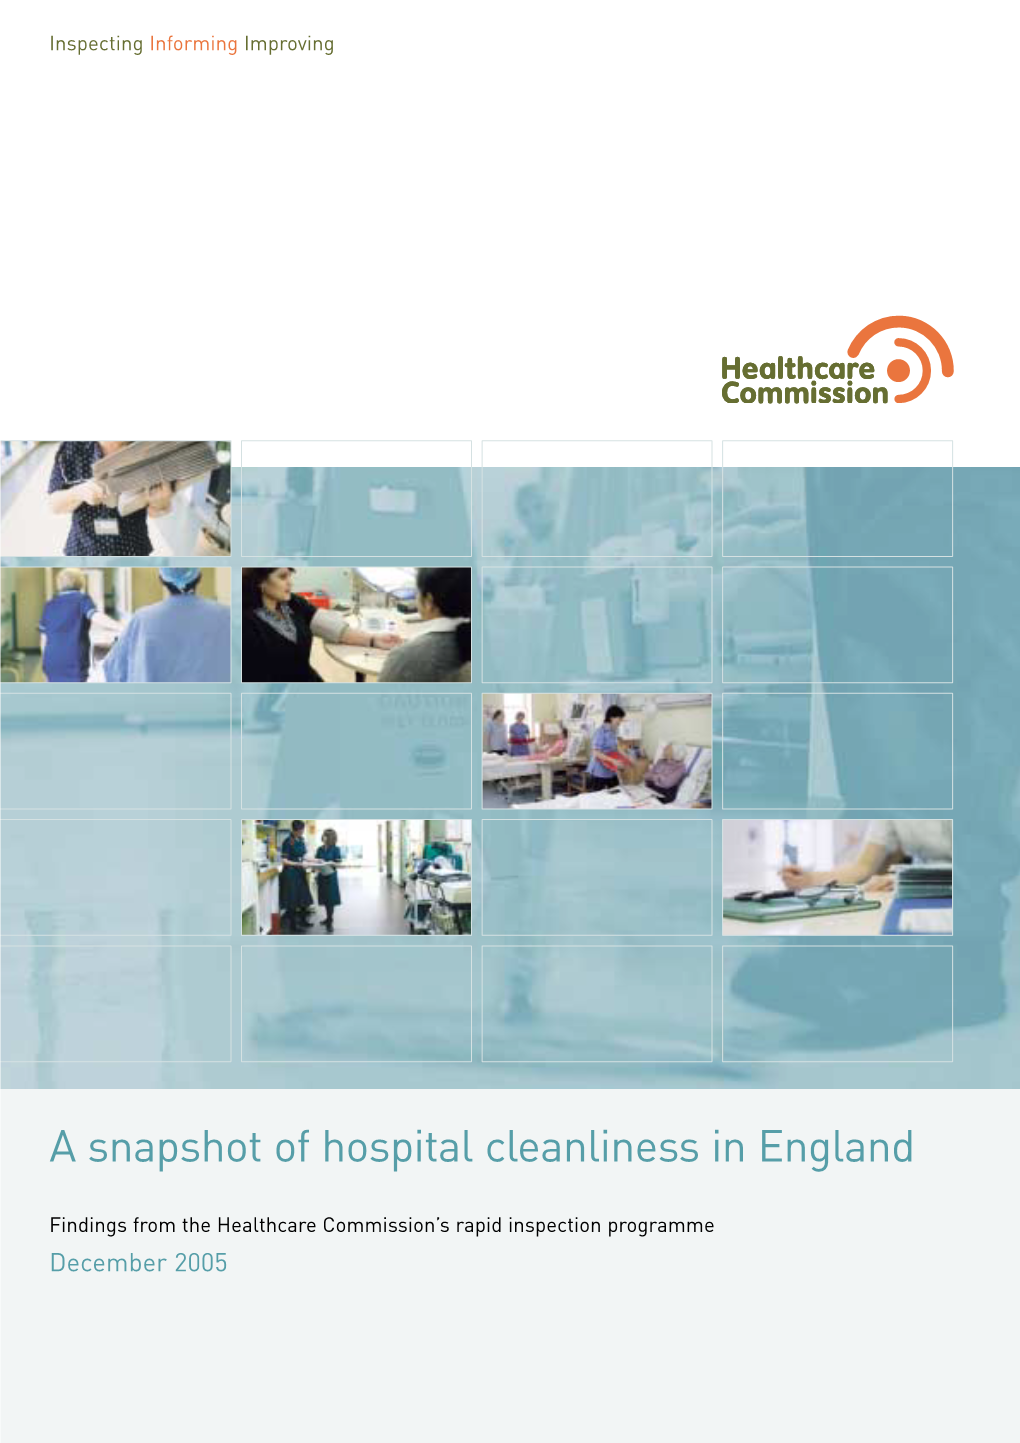 A Snapshot of Hospital Cleanliness in England